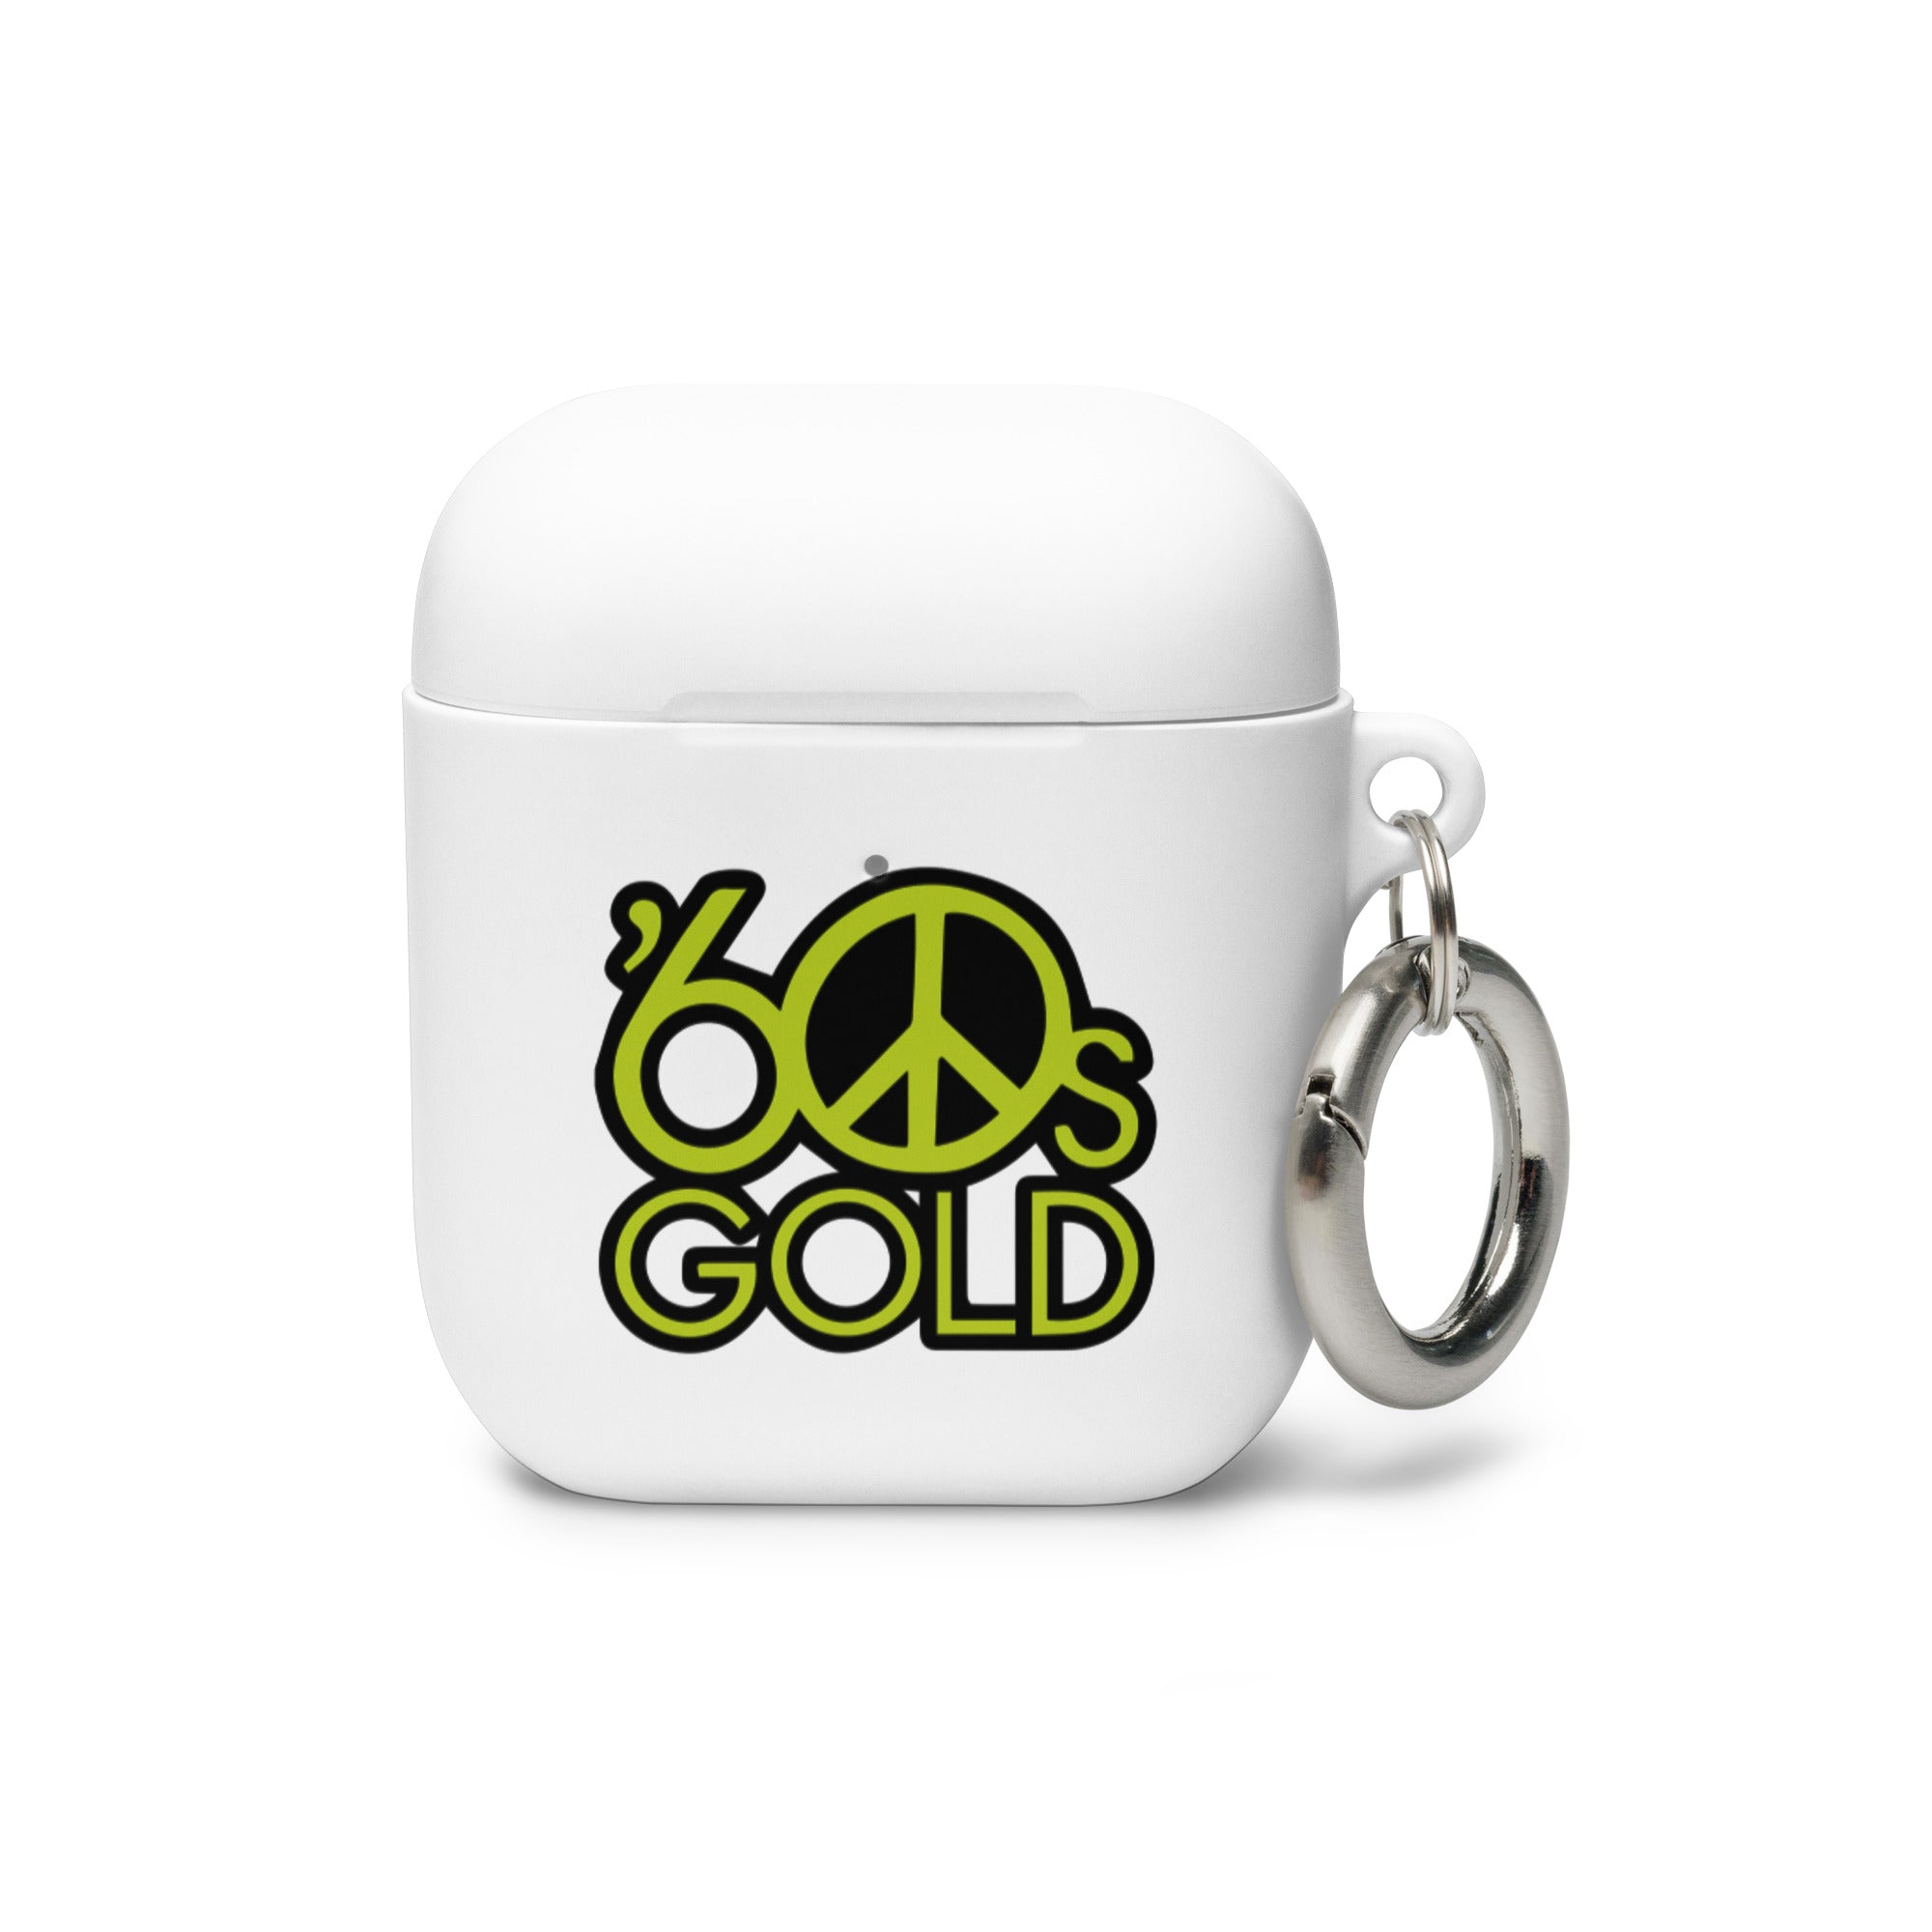 60s Gold: AirPods® Case Cover